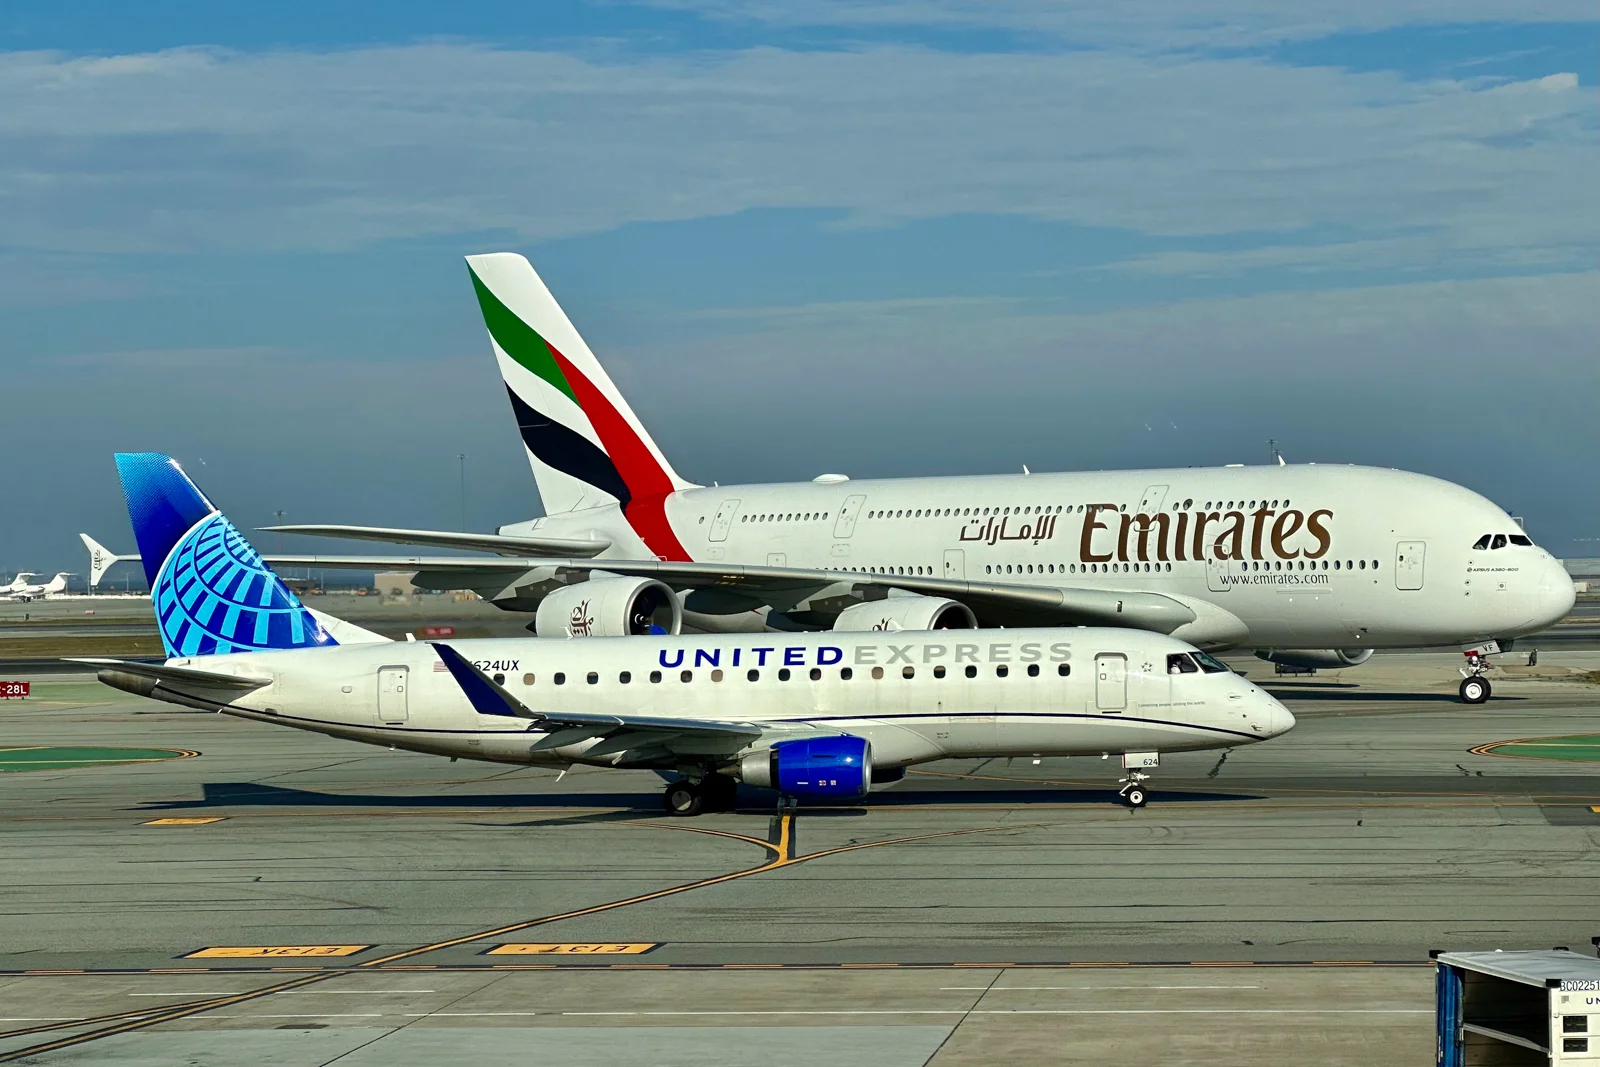 United launches flights to Dubai through an unprecedented alliance with Emirates.